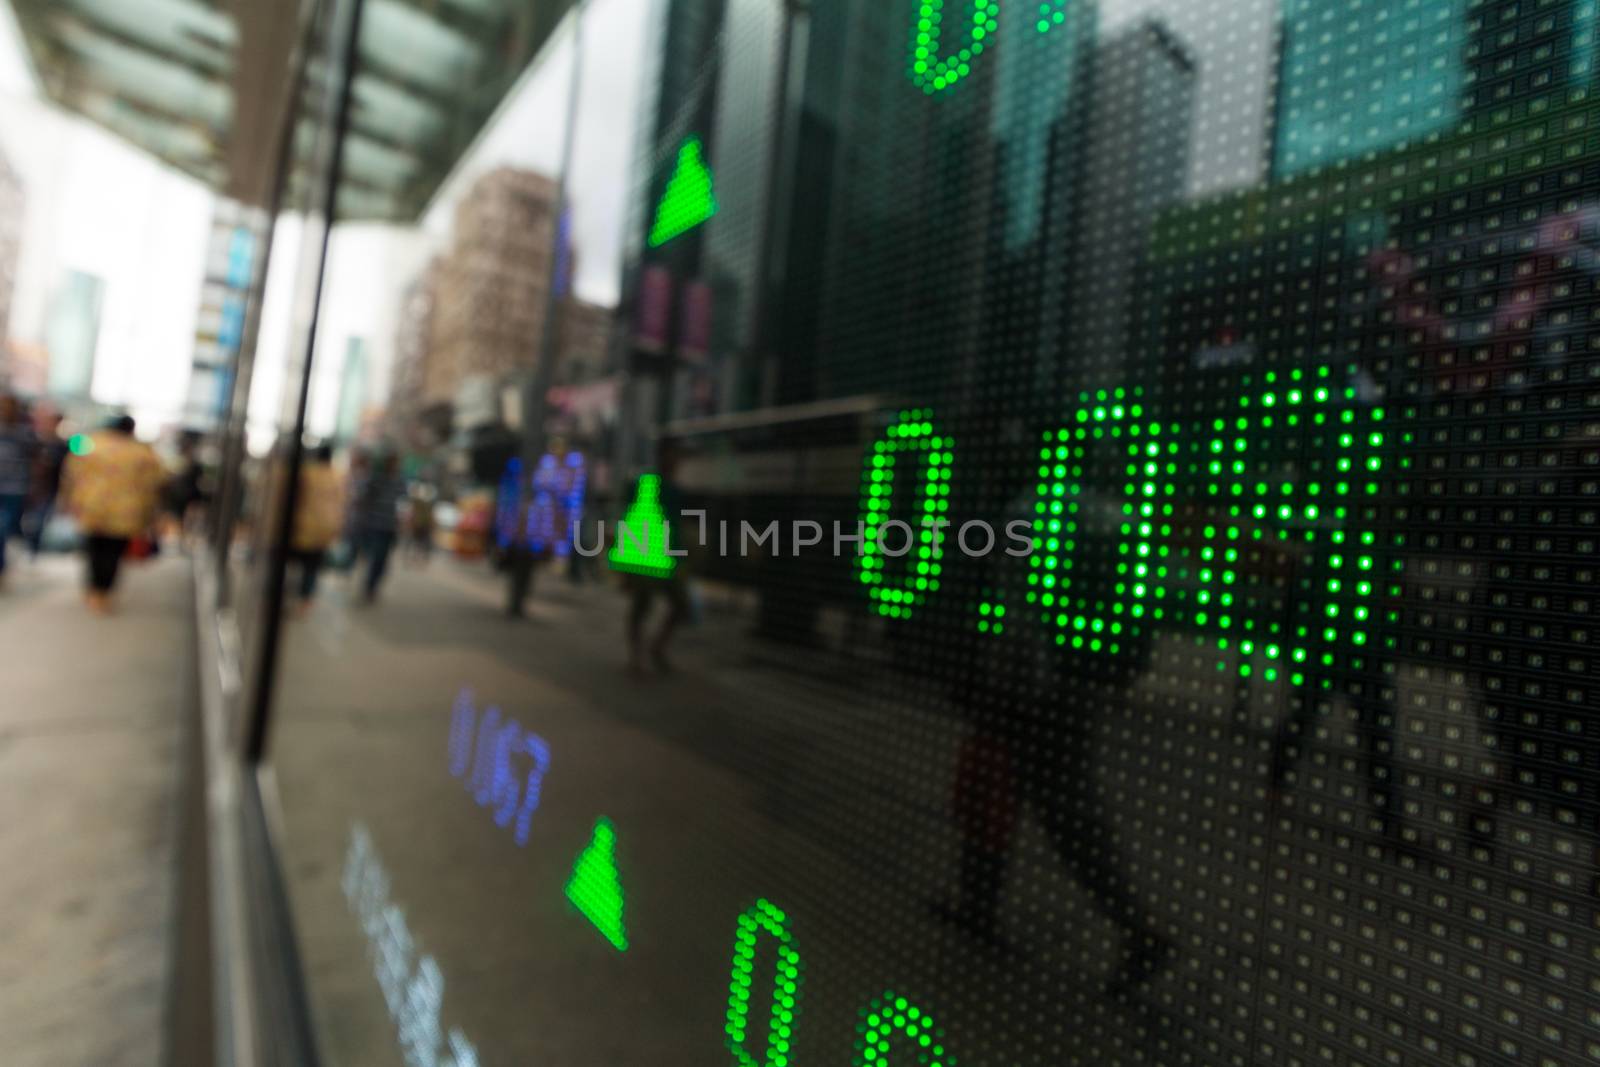 Display stock market numbers by leungchopan